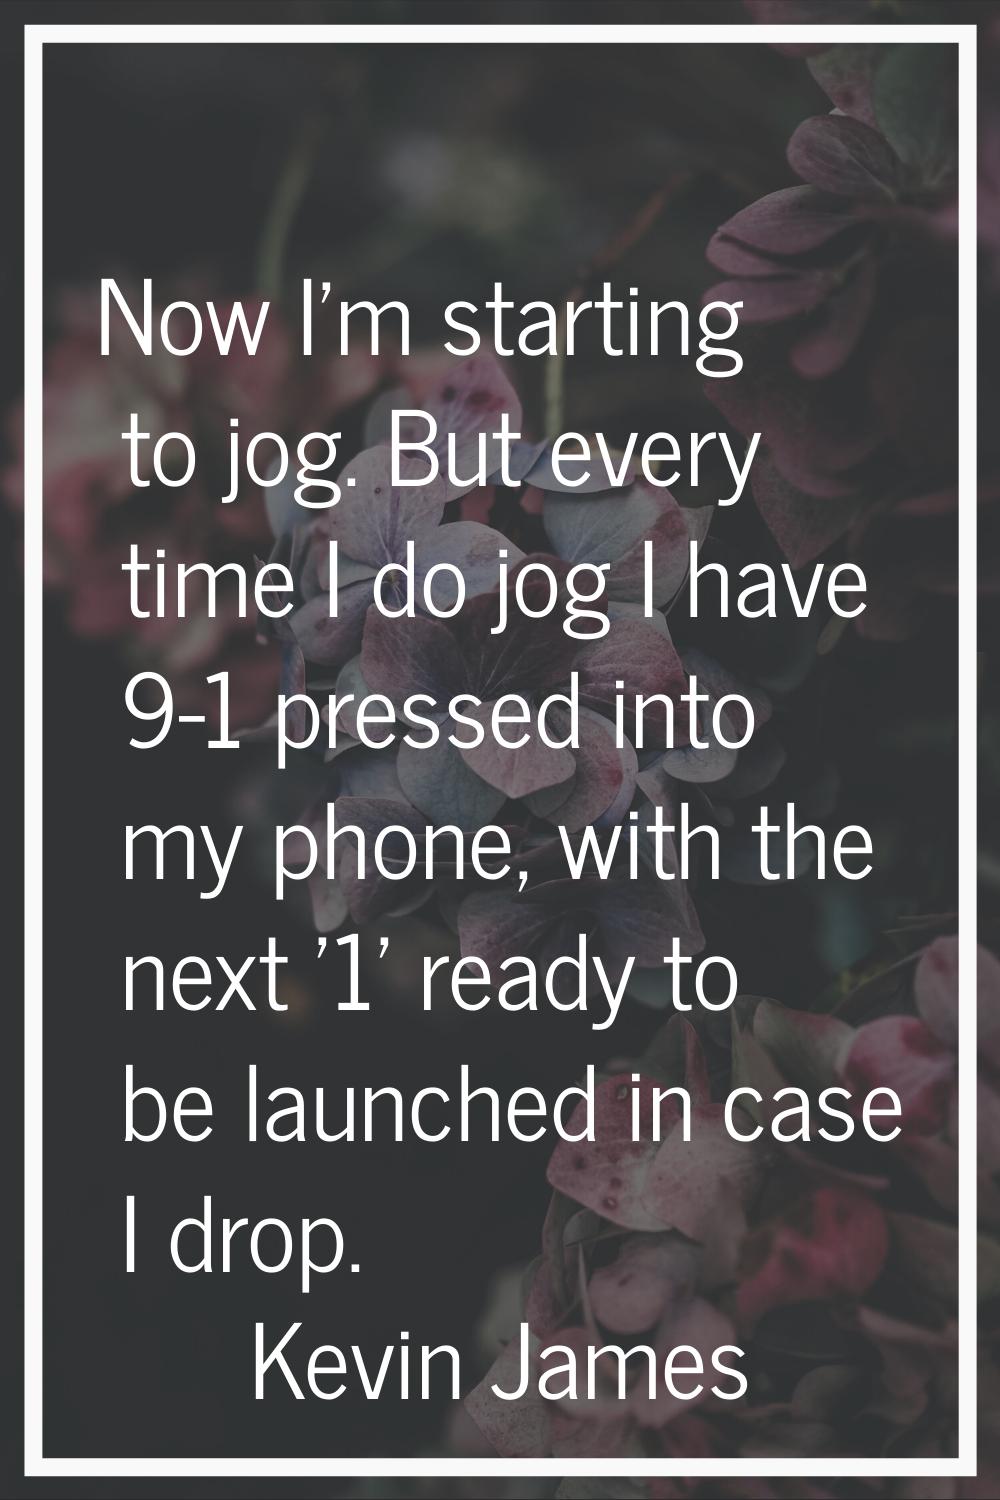 Now I'm starting to jog. But every time I do jog I have 9-1 pressed into my phone, with the next '1